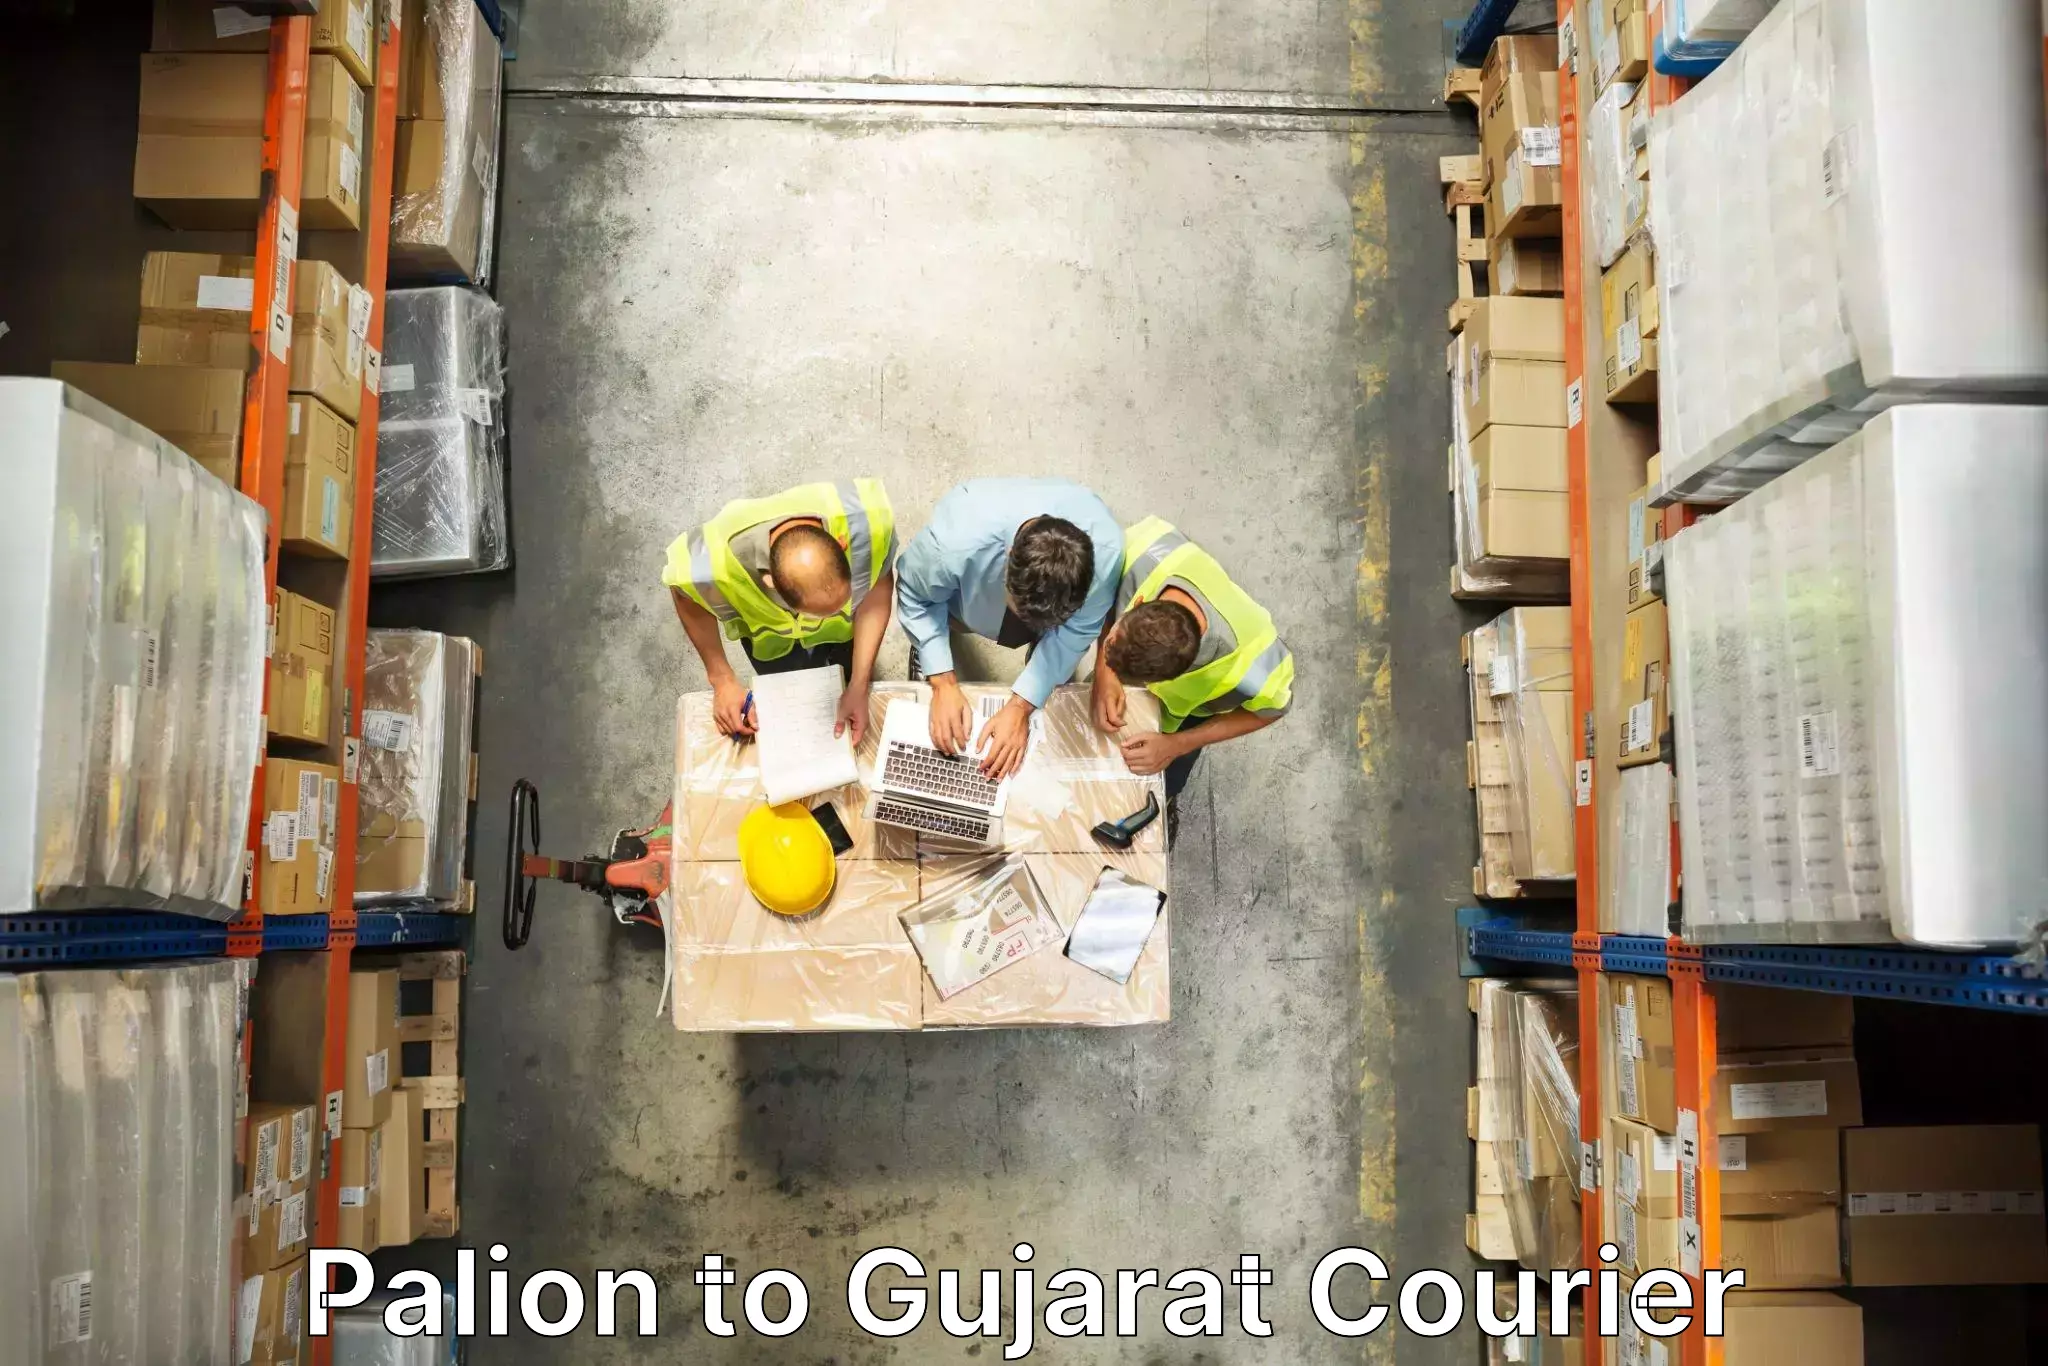 Furniture moving specialists Palion to Gujarat